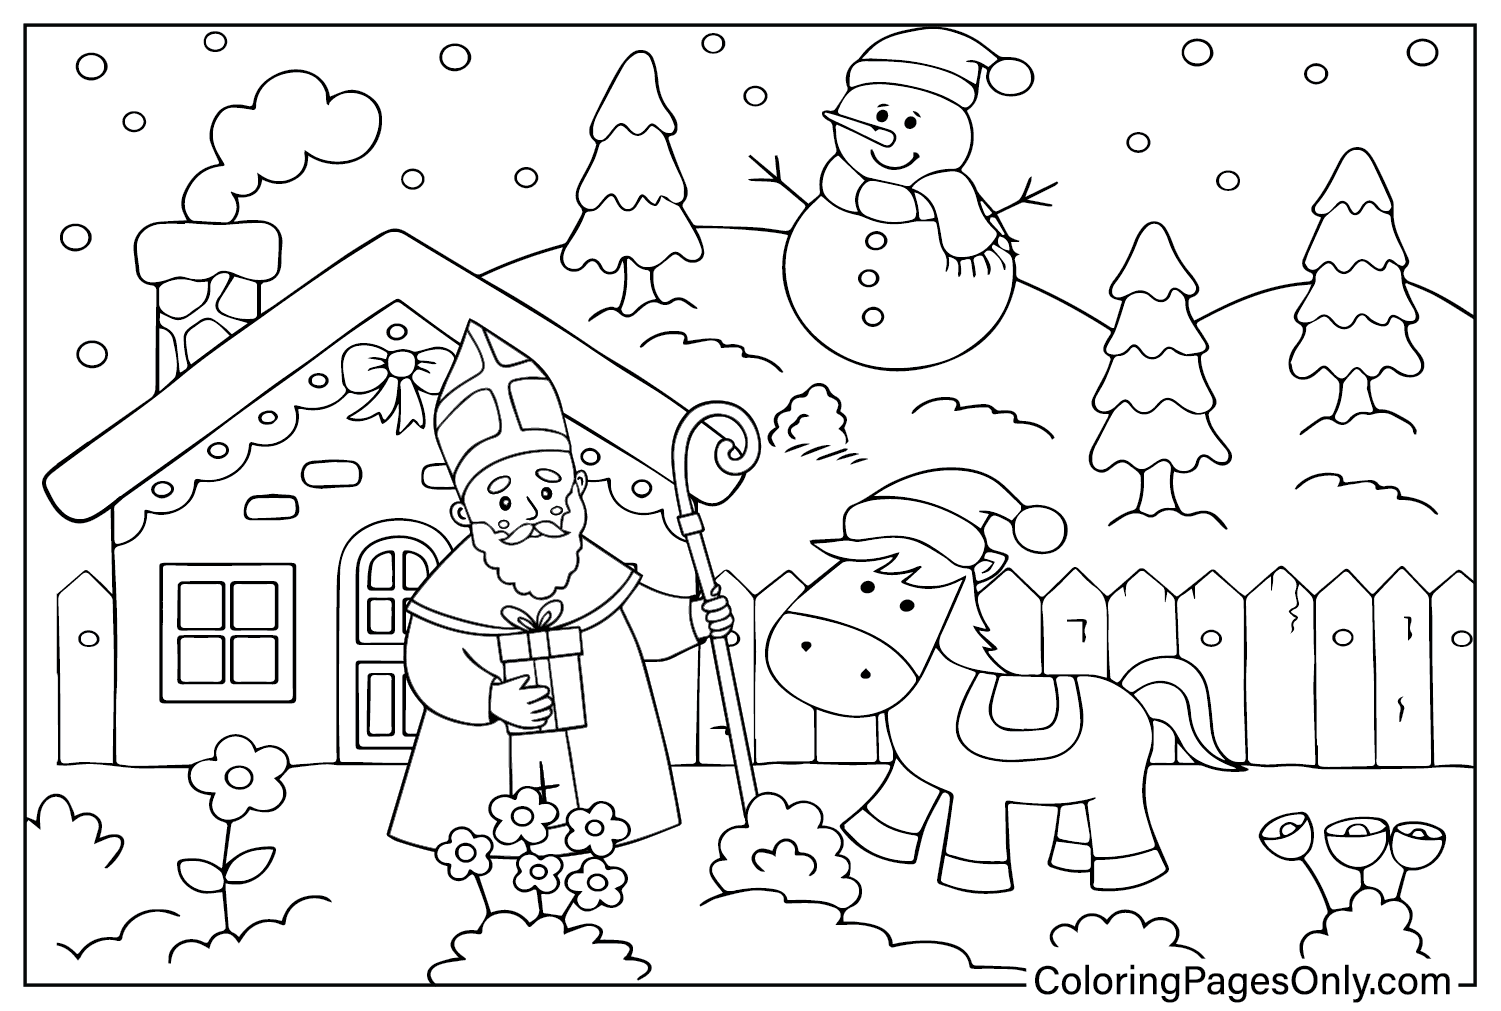 Saint Nicholas Day Coloring Page to Printable from Saint Nicholas Day